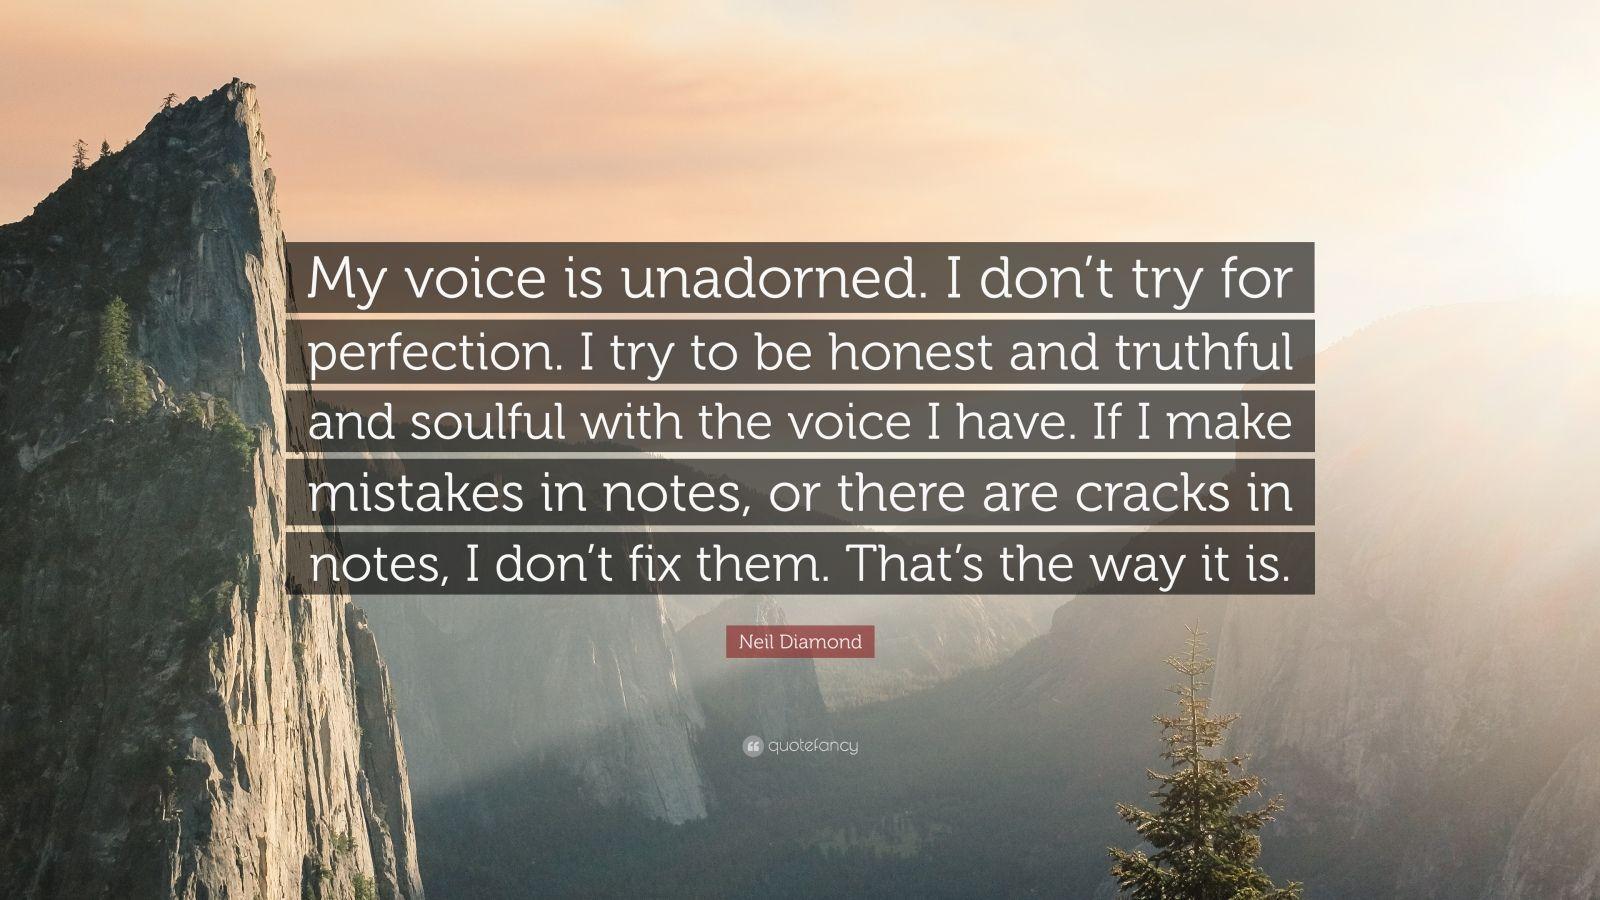 Neil Diamond Quote: “My voice is unadorned. I don't try